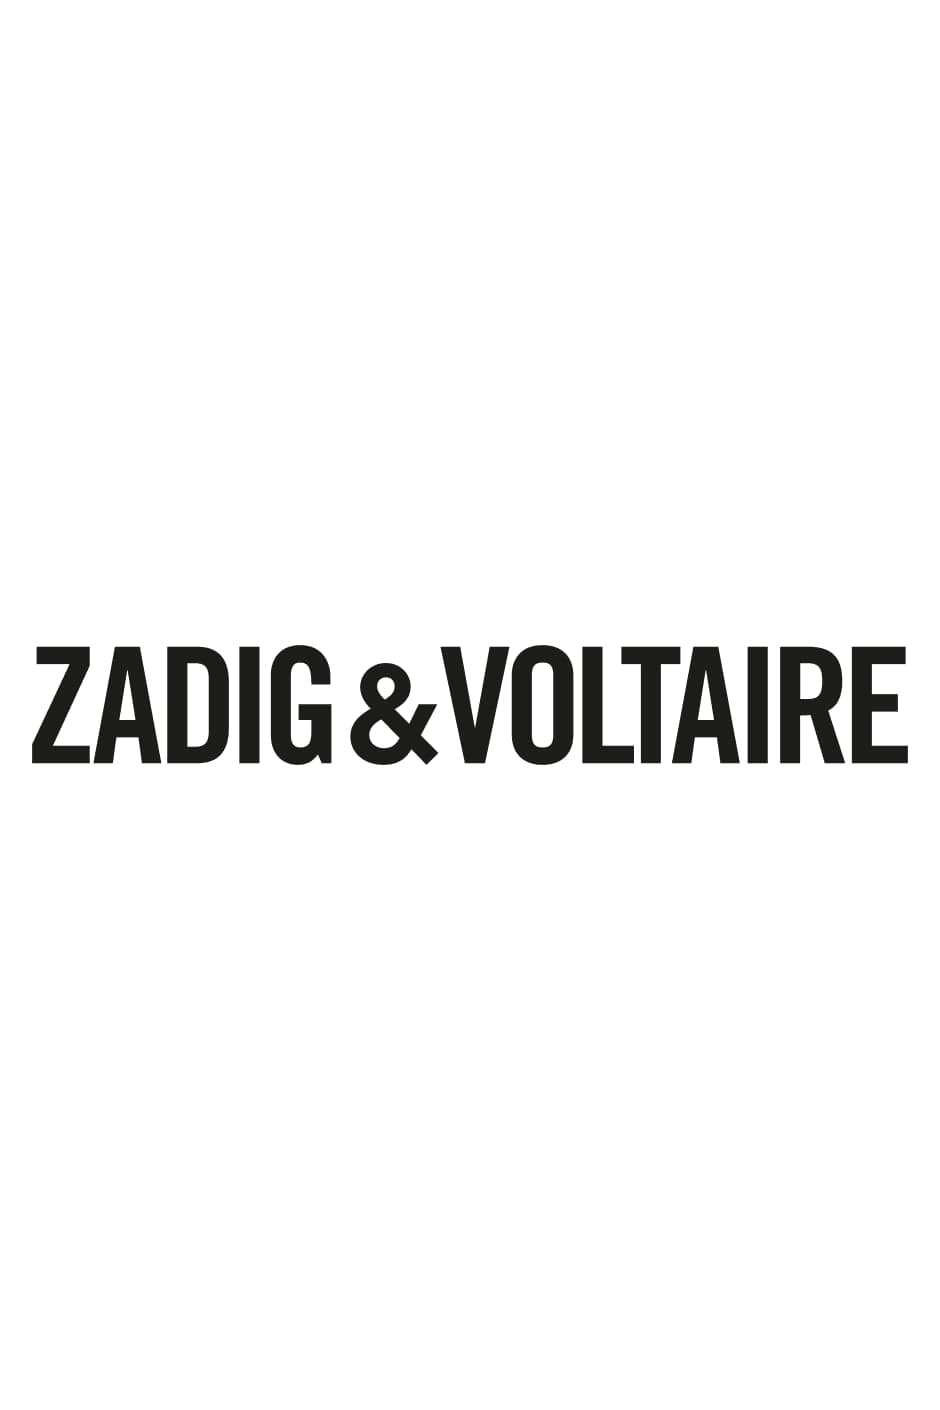 Top Topzy Strass Seide - Zadig & Voltaire